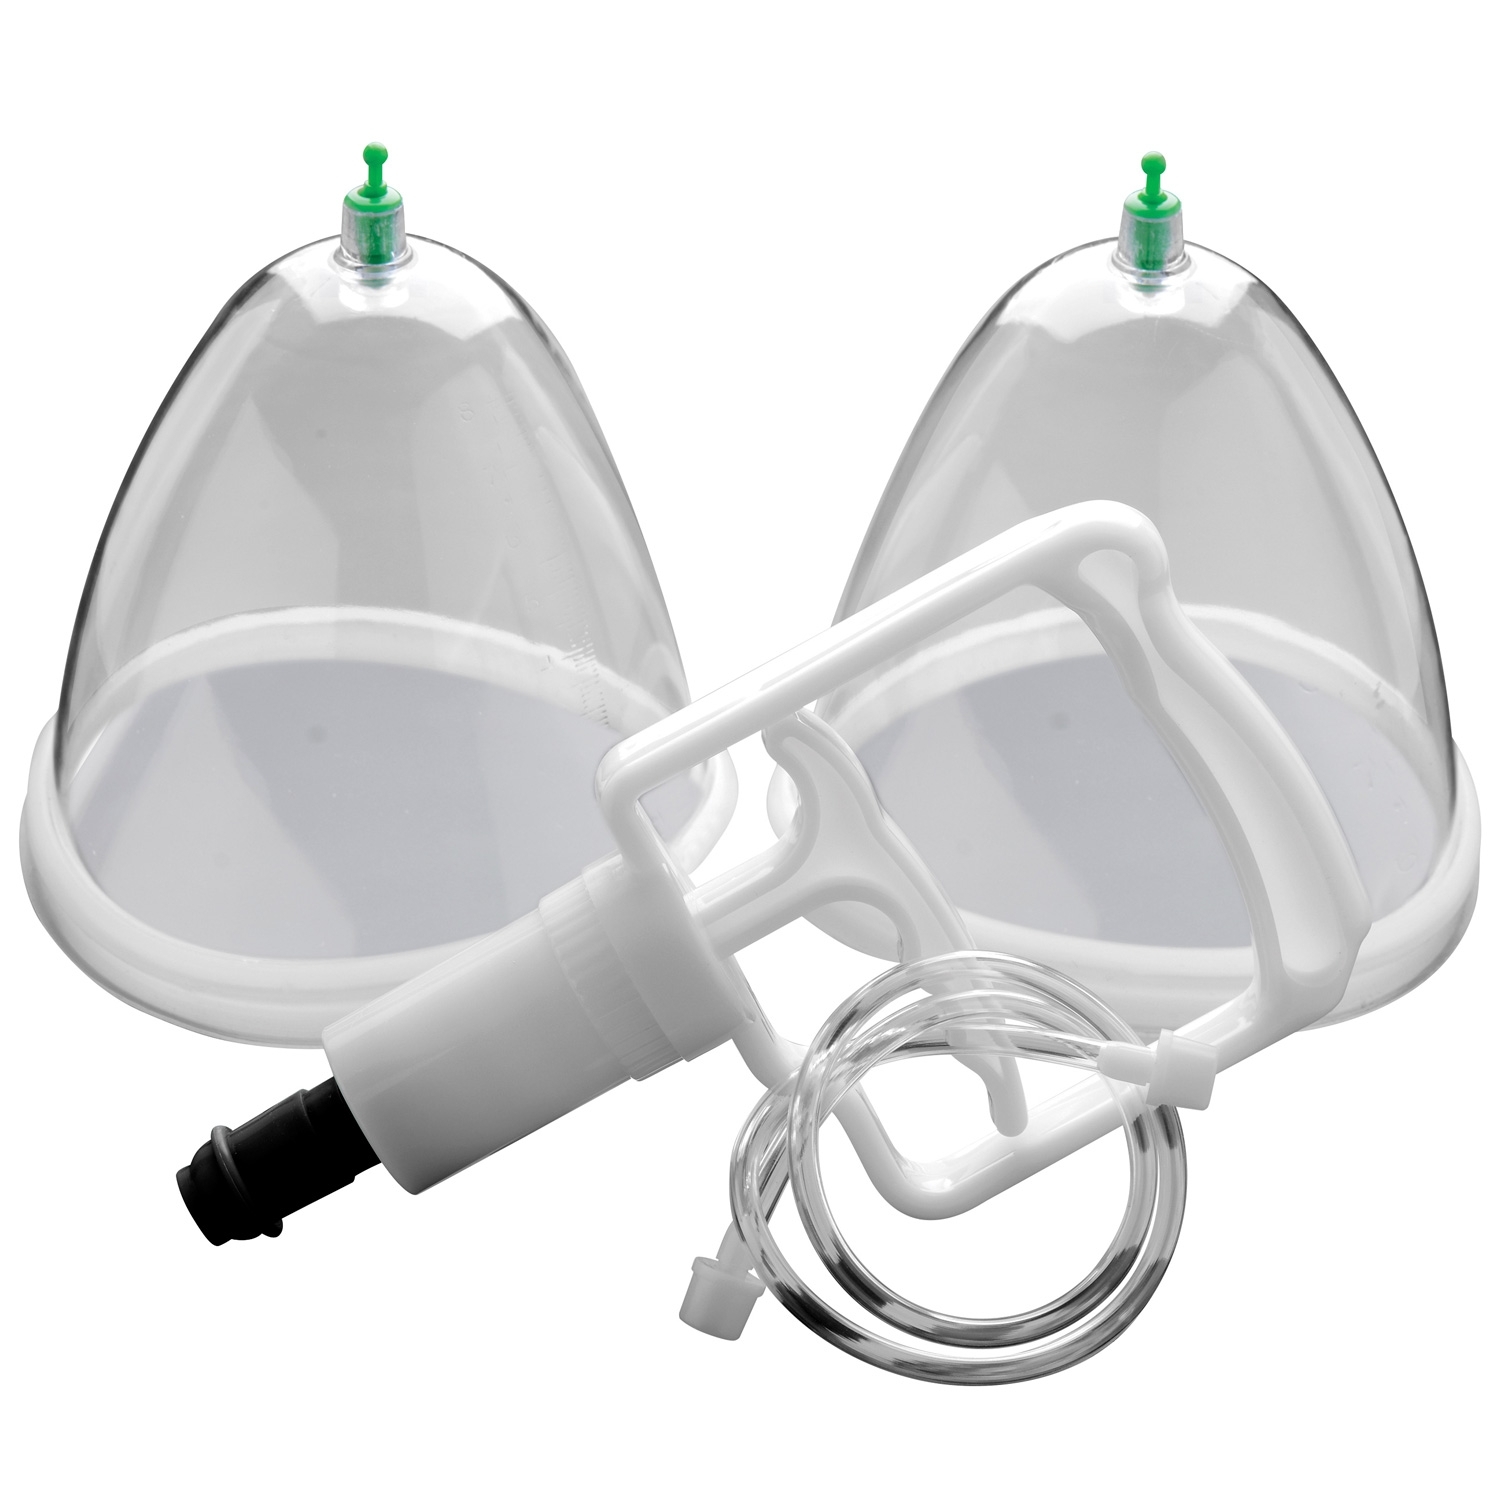 Size Matters Breast Cupping System - Clear